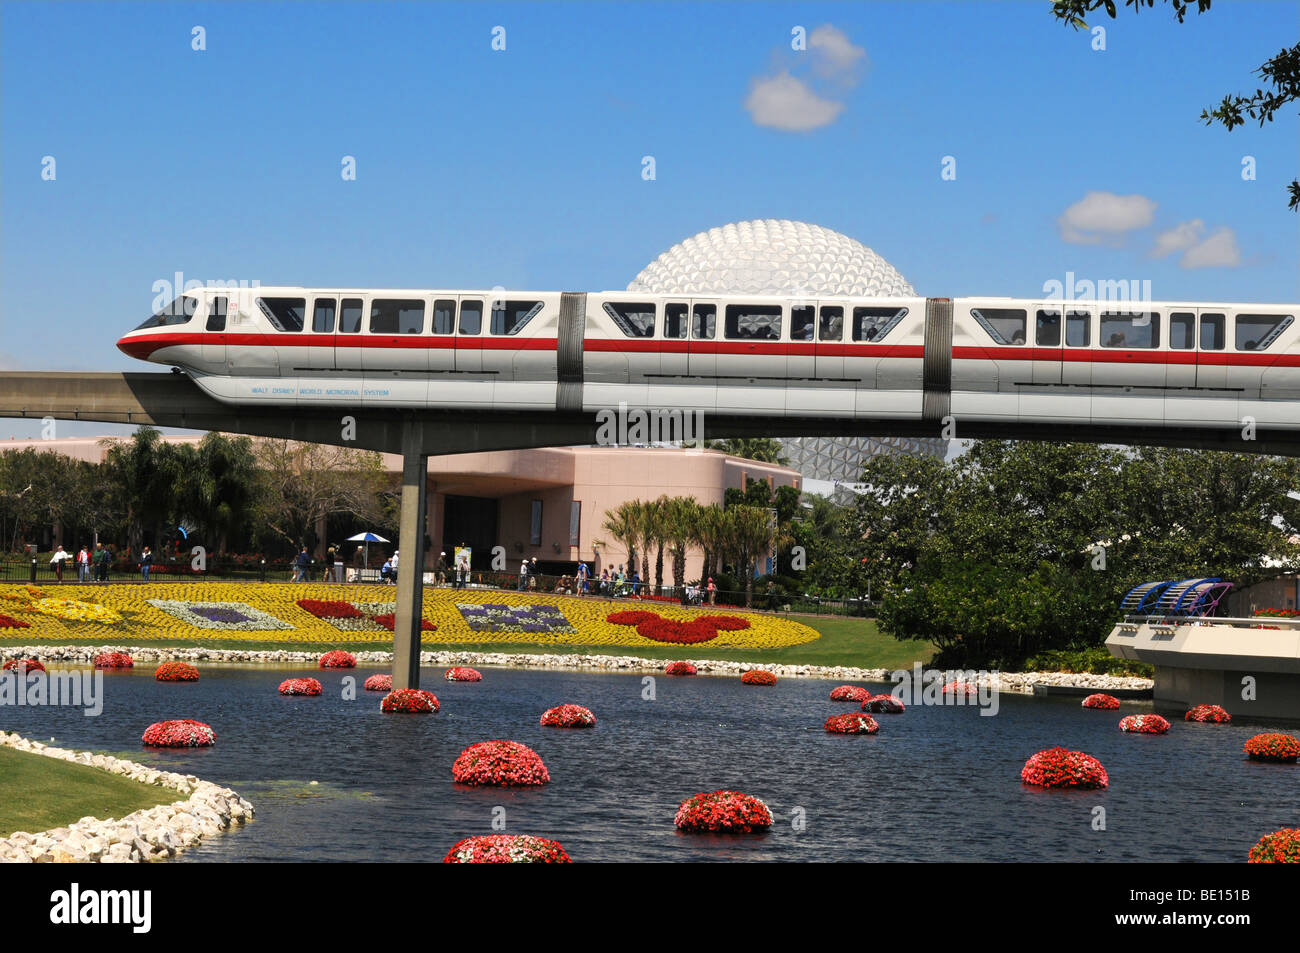 Monorail at Walt Disney World with EPCOT Center in the background Stock Photo